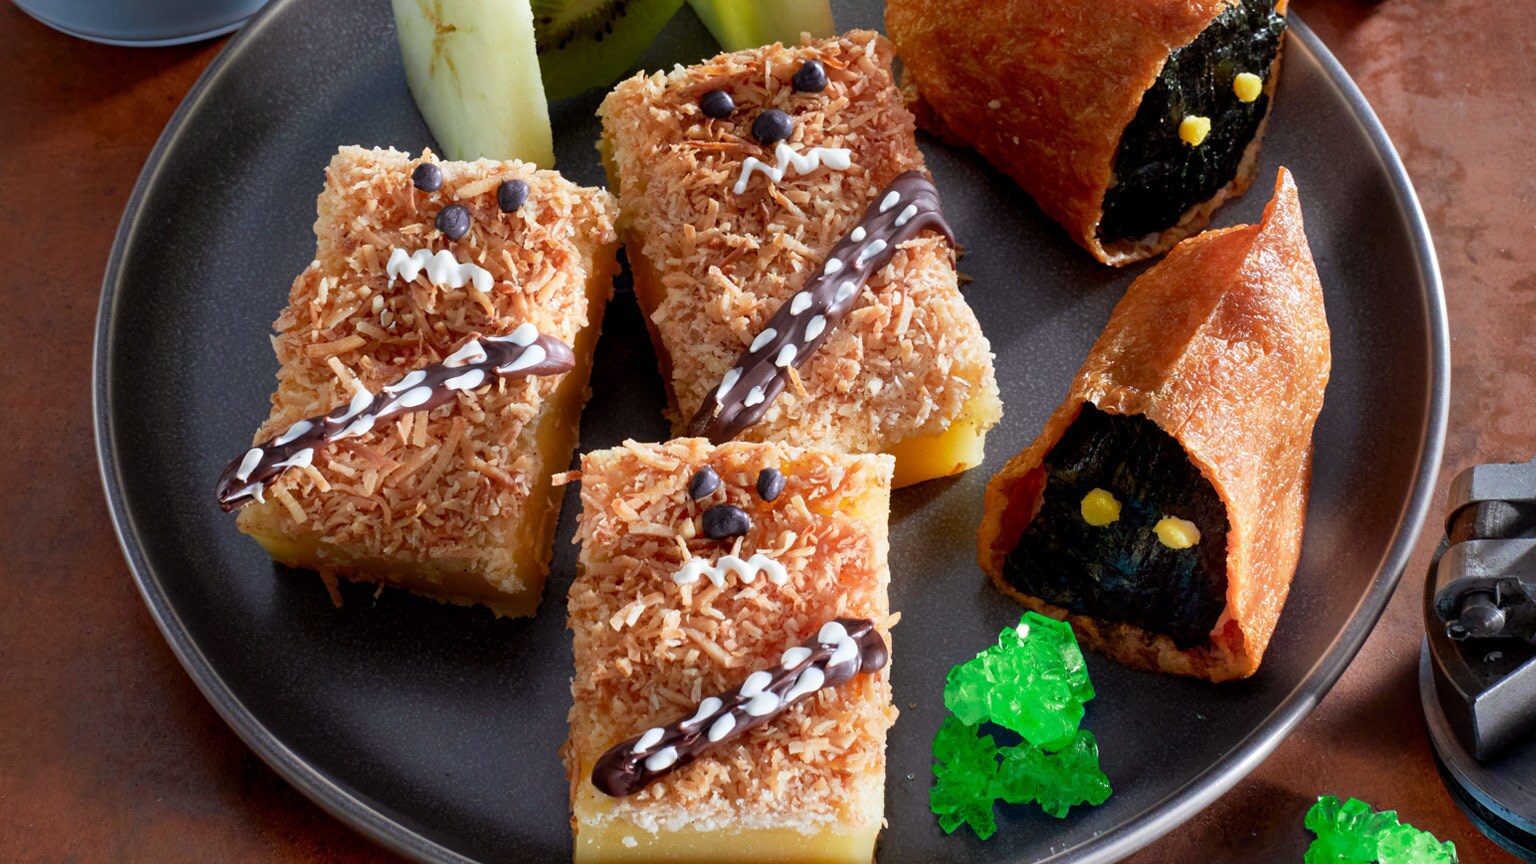 Star Wars: The Padawan Cookbook Will Feature Galactic Recipes for All Ages